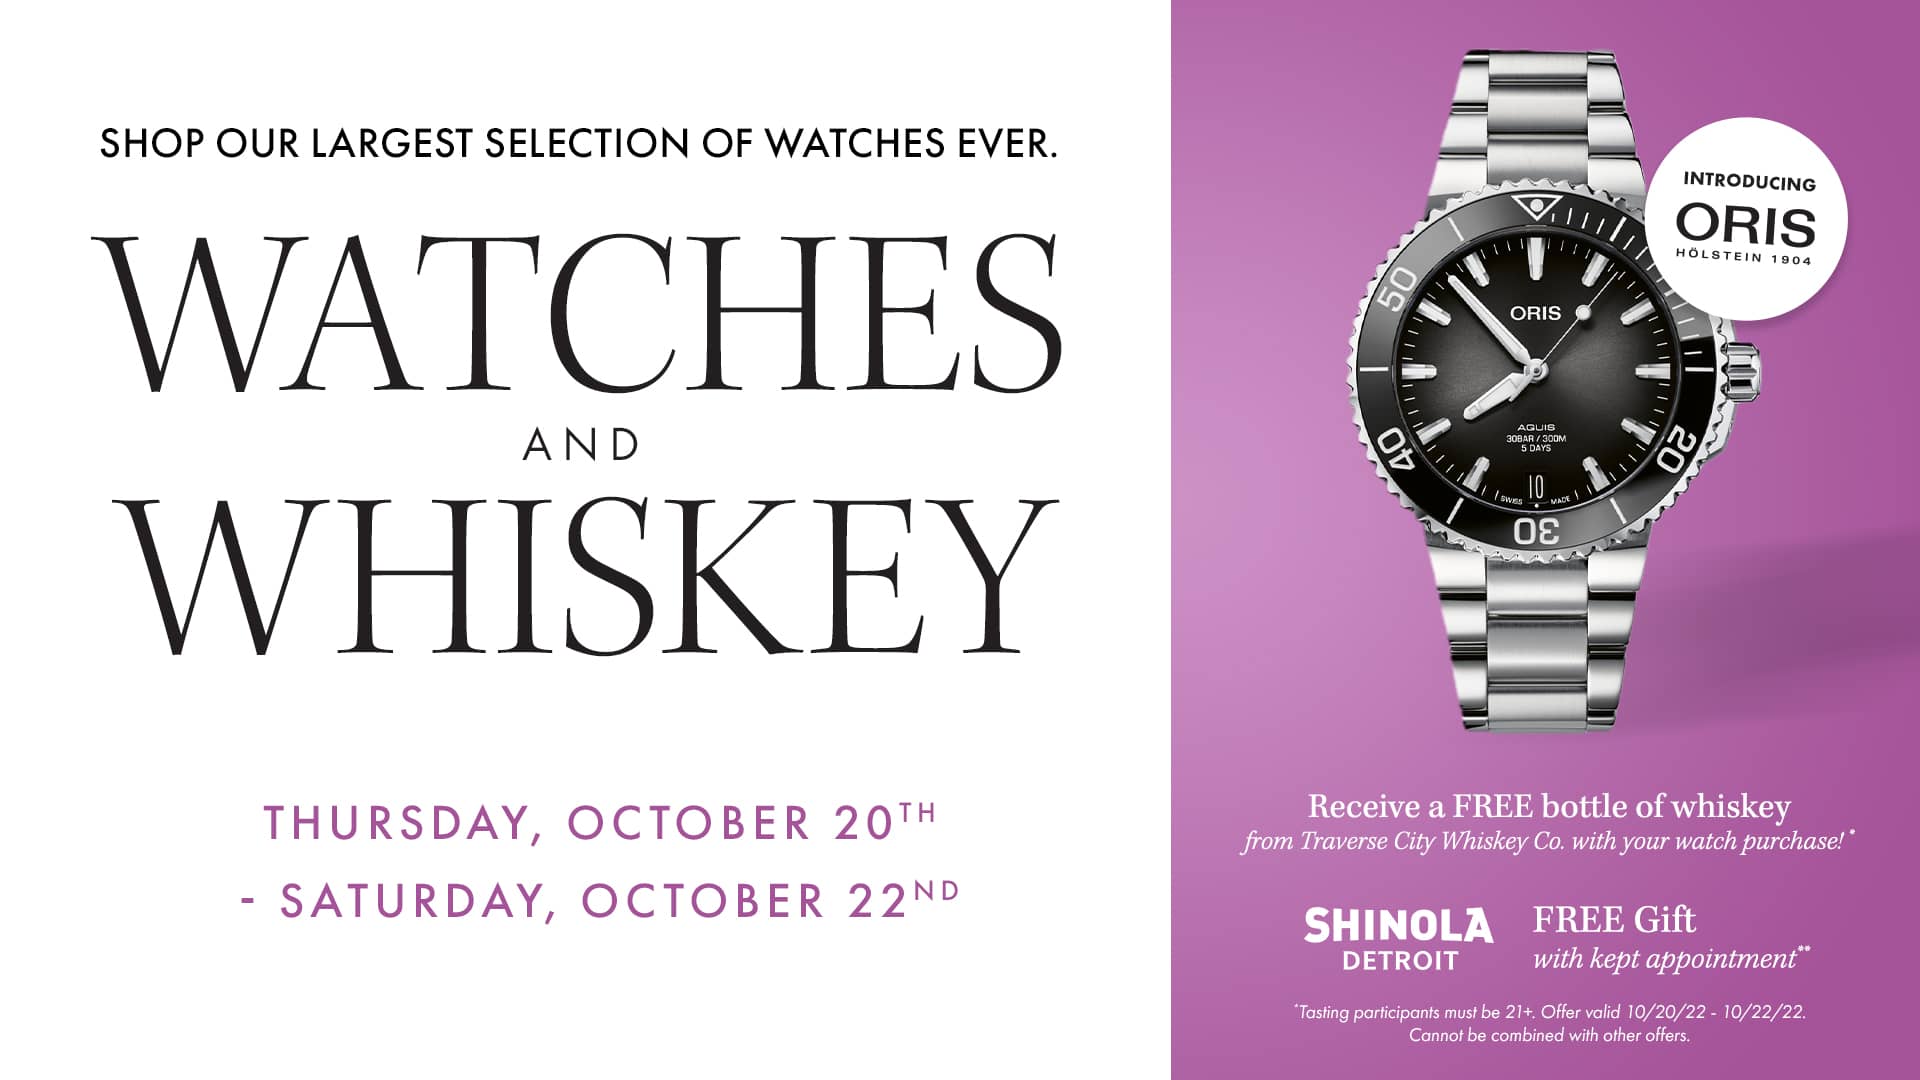 Shop our largest selection of watches ever. Watches and Whiskey event. October 20th-22nd.